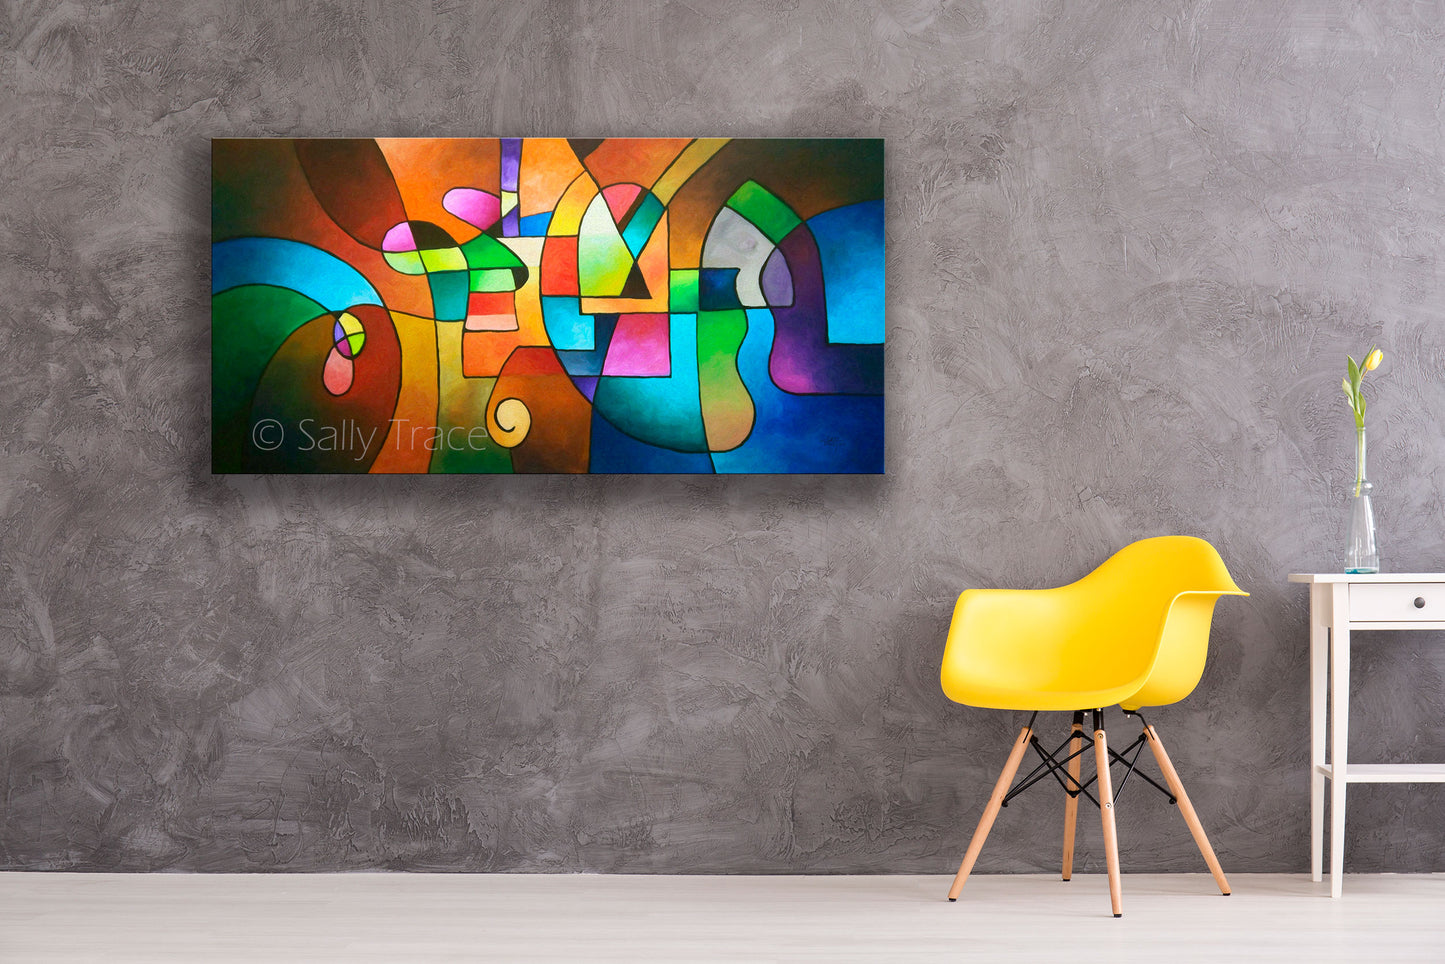 Contemporary geometric abstraction giclee print on stretched canvas by Sally Trace, room view